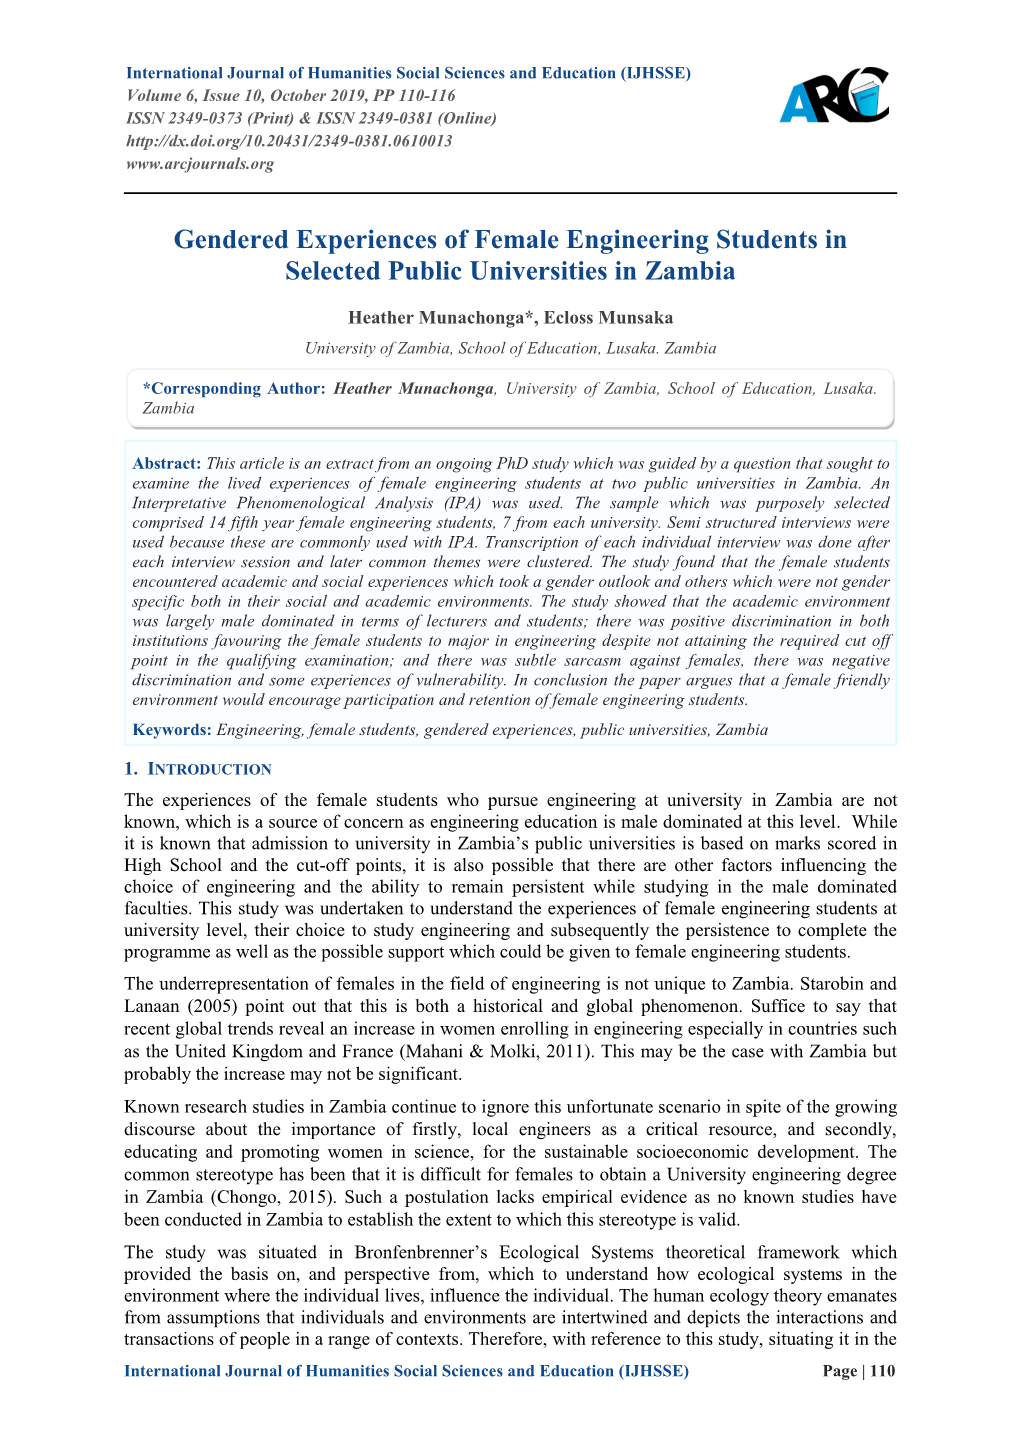 Gendered Experiences of Female Engineering Students in Selected Public Universities in Zambia